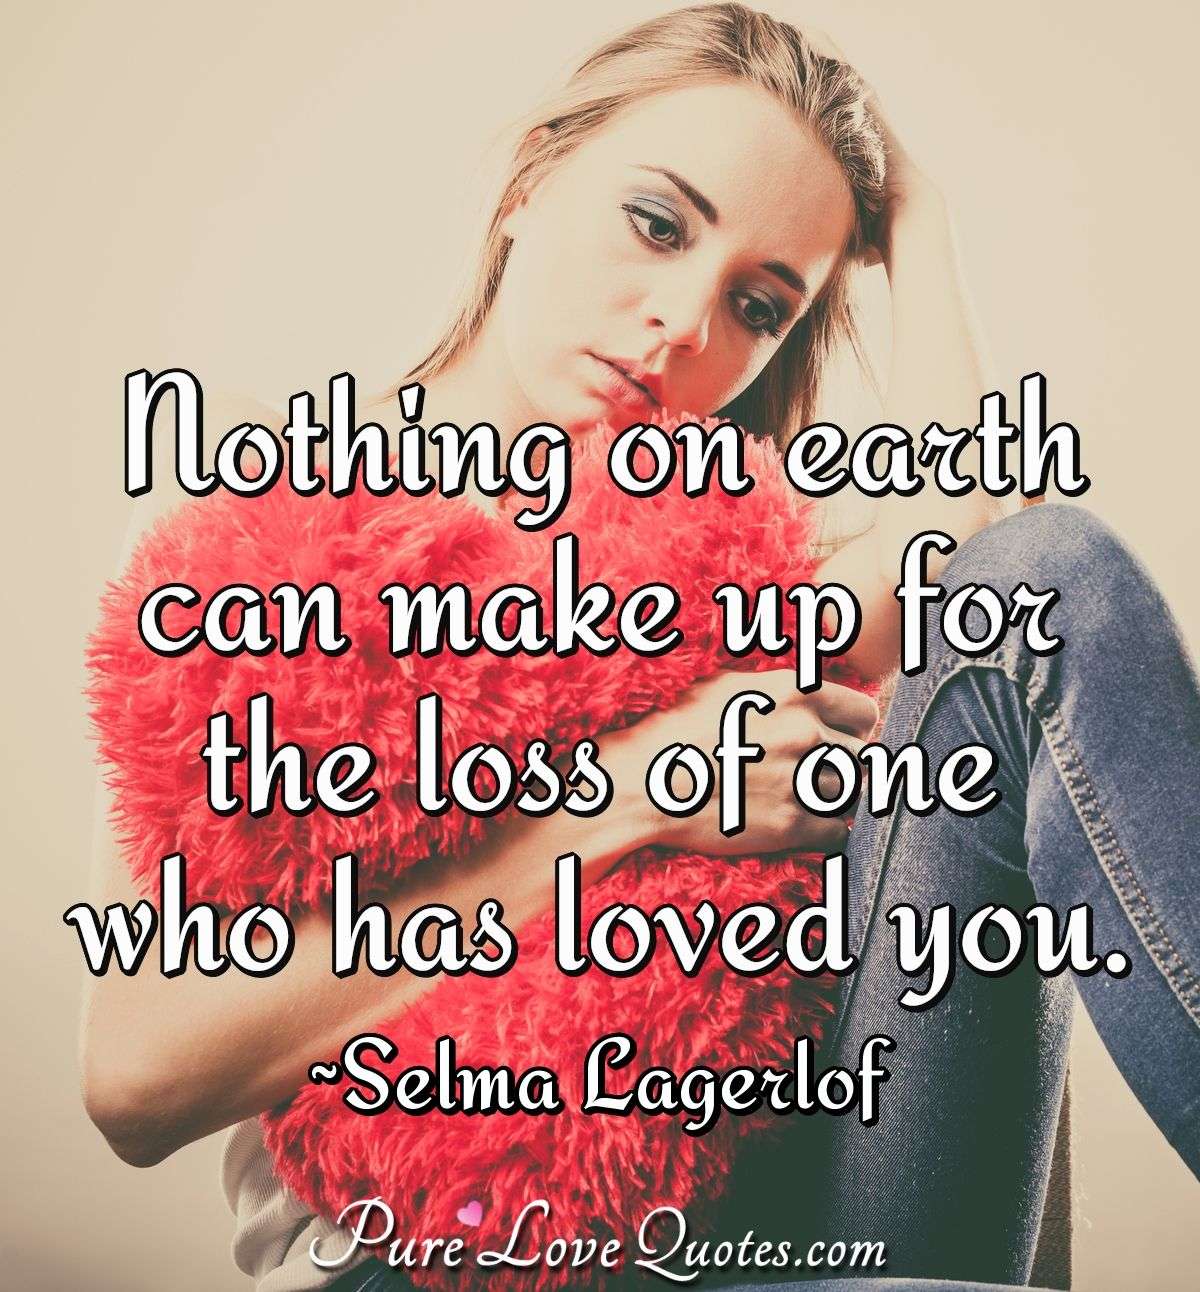 Nothing on earth can make up for the loss of one who has loved you. - Selma Lagerlof